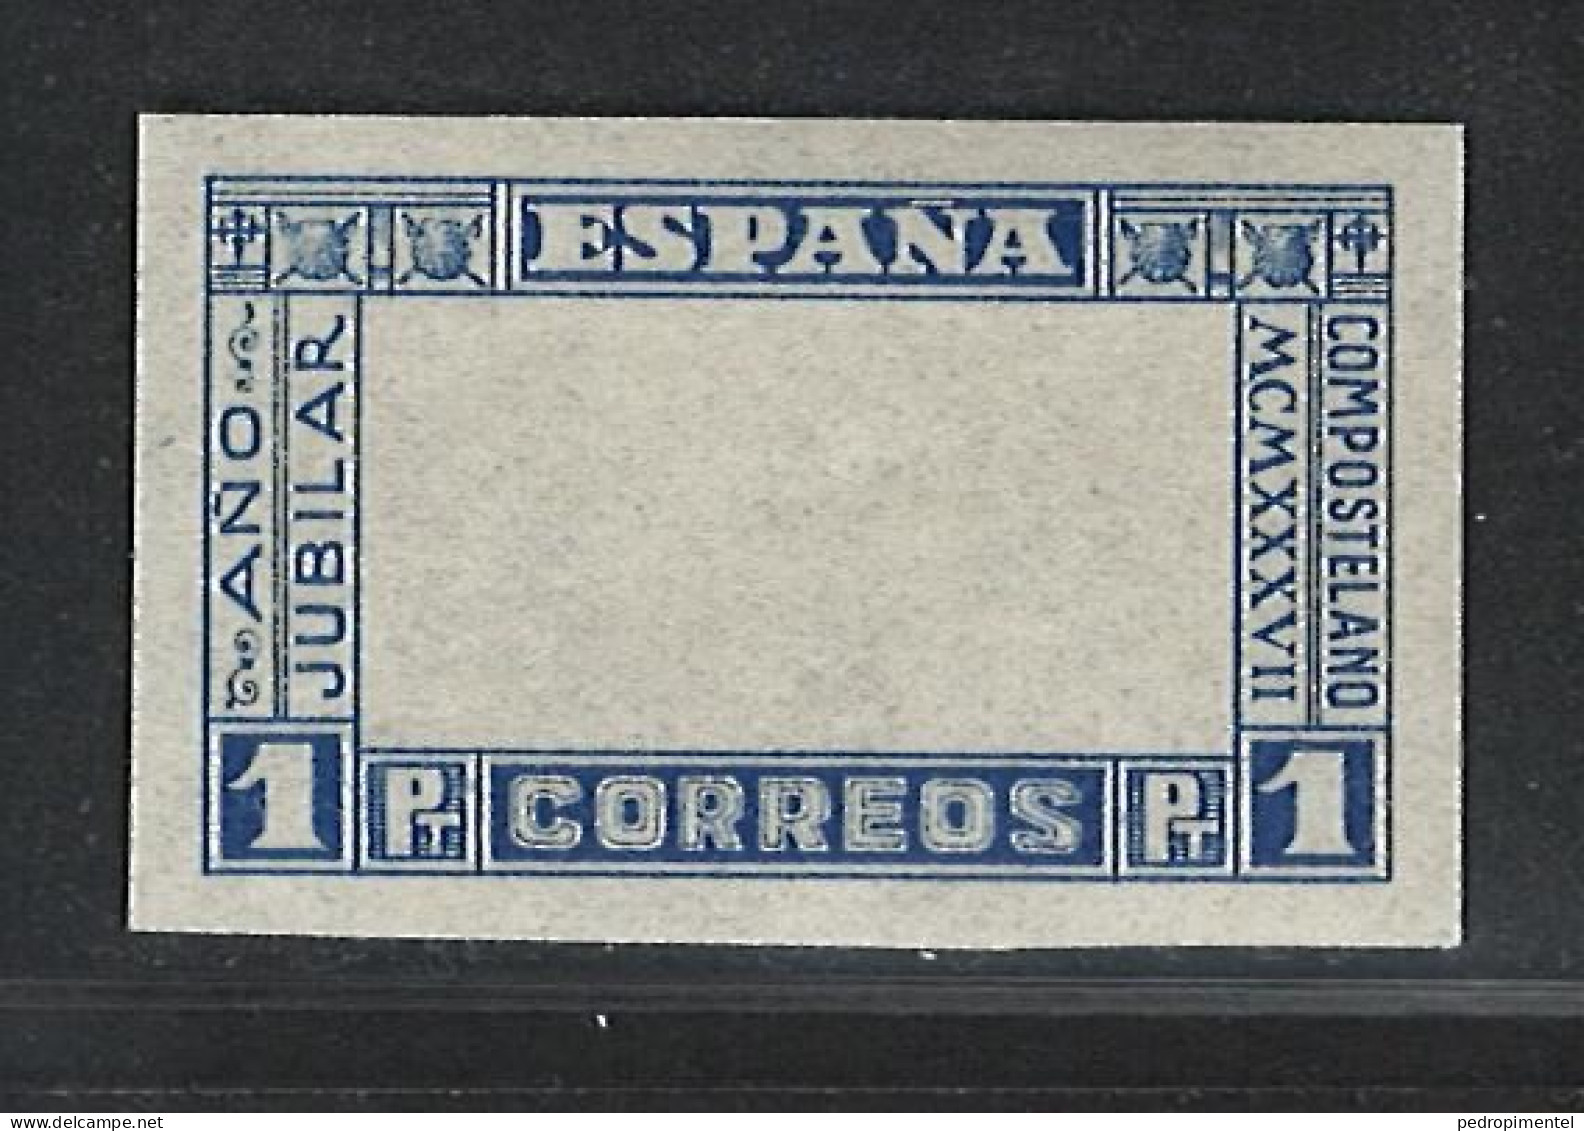 Spain Stamps | 1937 | Ano Jubilar Frame |  MNH Unperforated - Unused Stamps